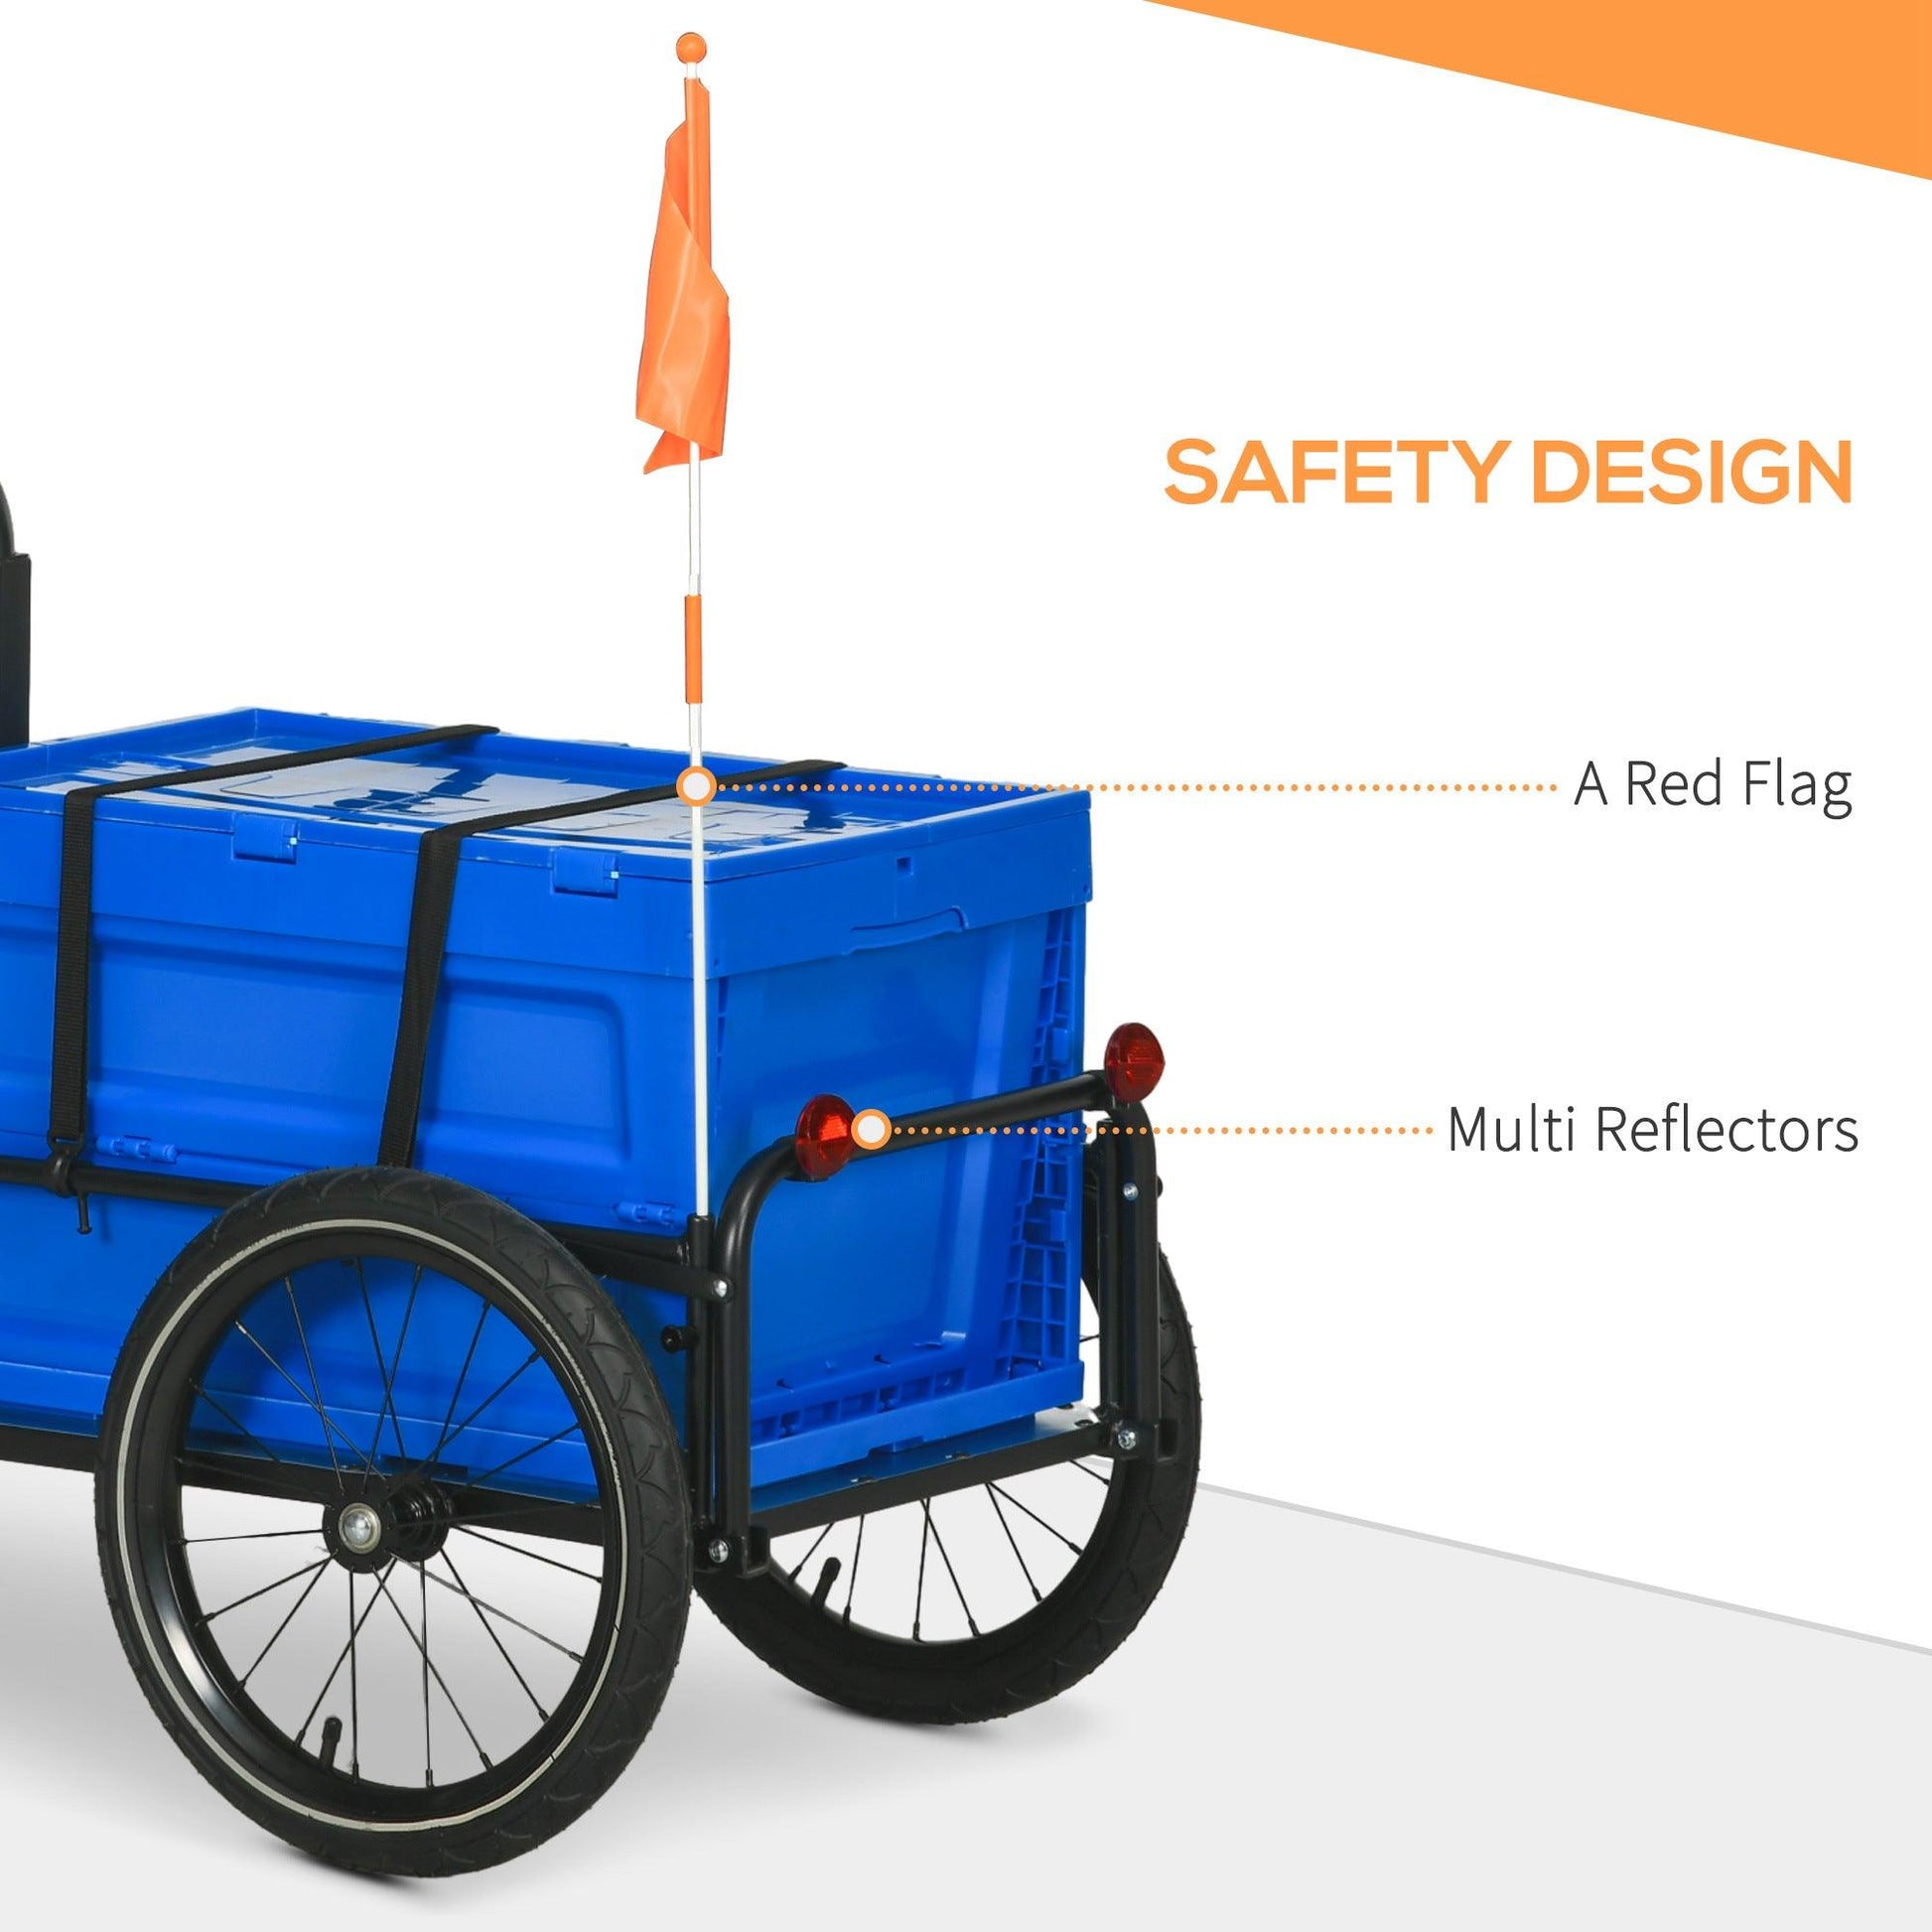 HOMCOM Steel Trailer for Bike, Bicycle Cargo Trailer with 65L Foldable Storage Box and Safe Reflectors, Max Load 40KG, Blue - ALL4U RETAILER LTD